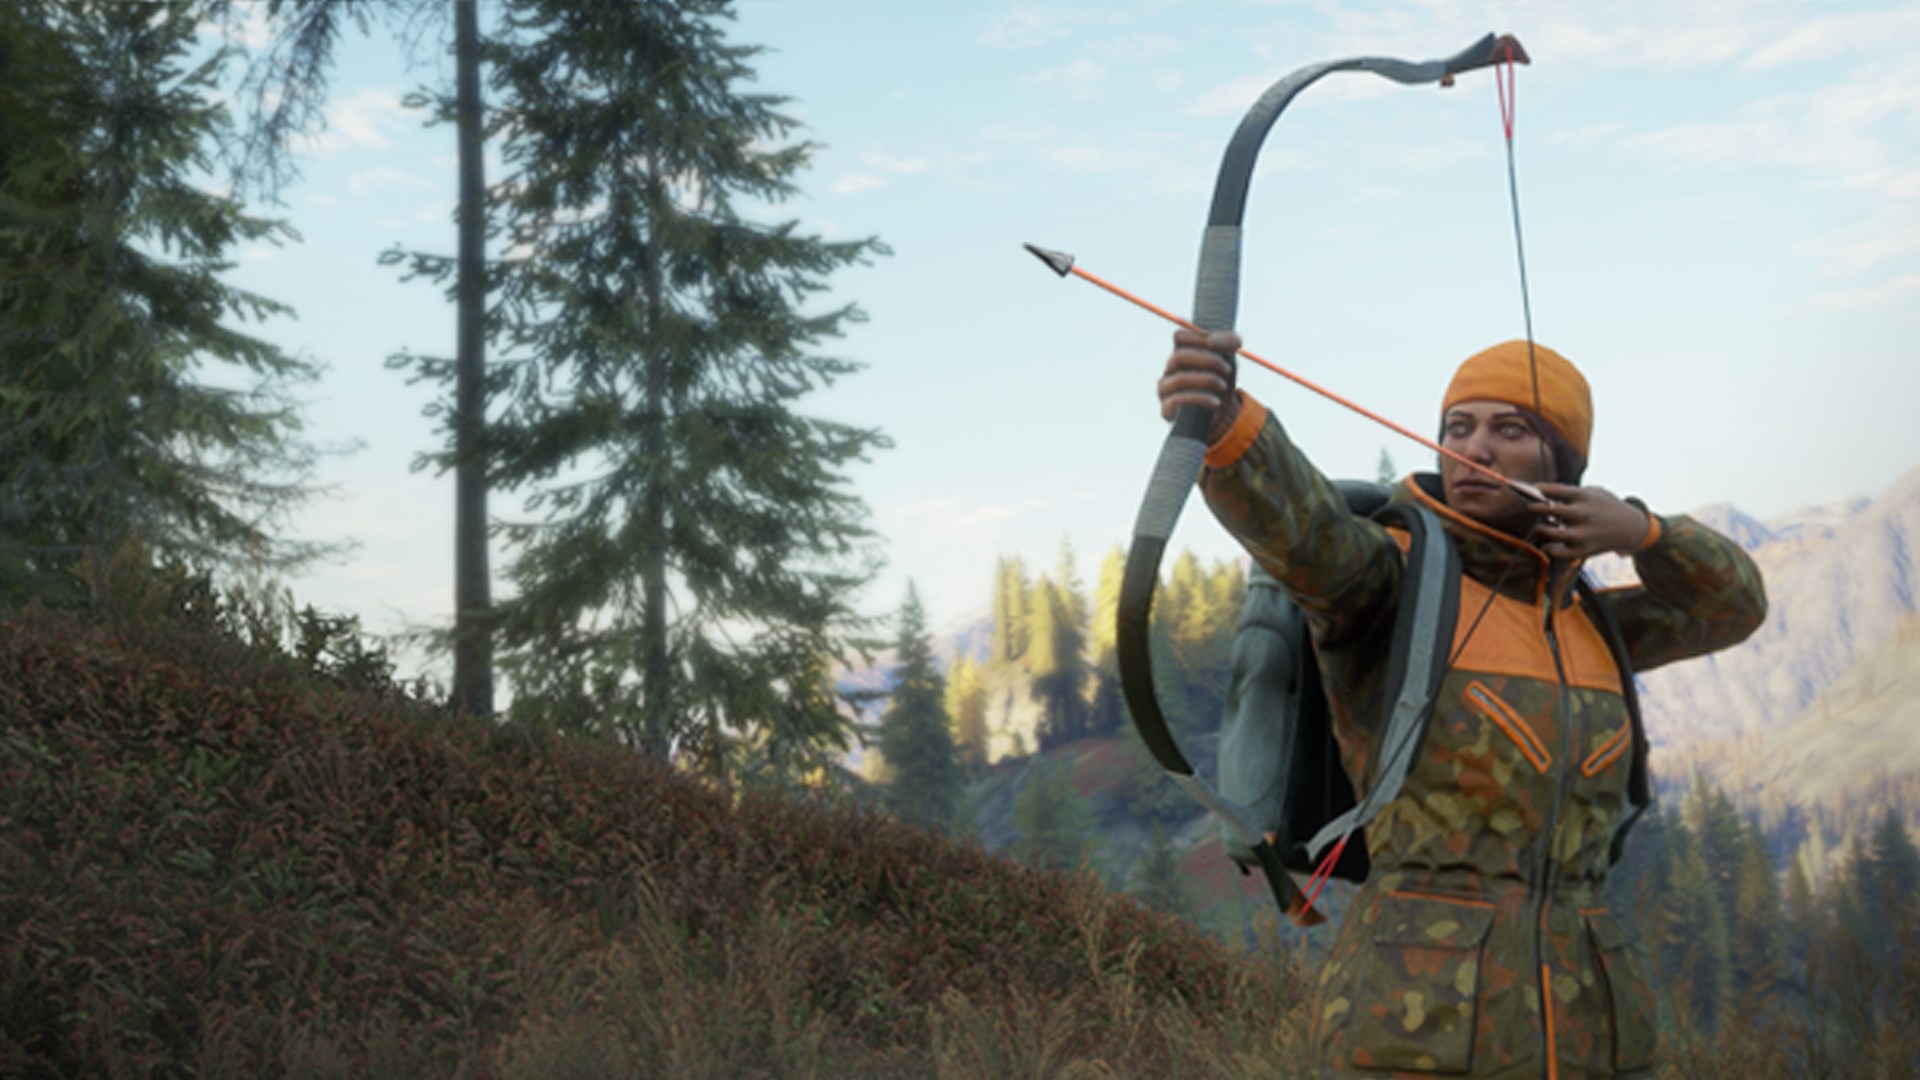 Call of the wild games. THEHUNTER Call of the Wild - Weapon Pack 1. The Hunter Call of the Wild арбалет. The Hunter 2017. The Hunter Call of the Wild лук.